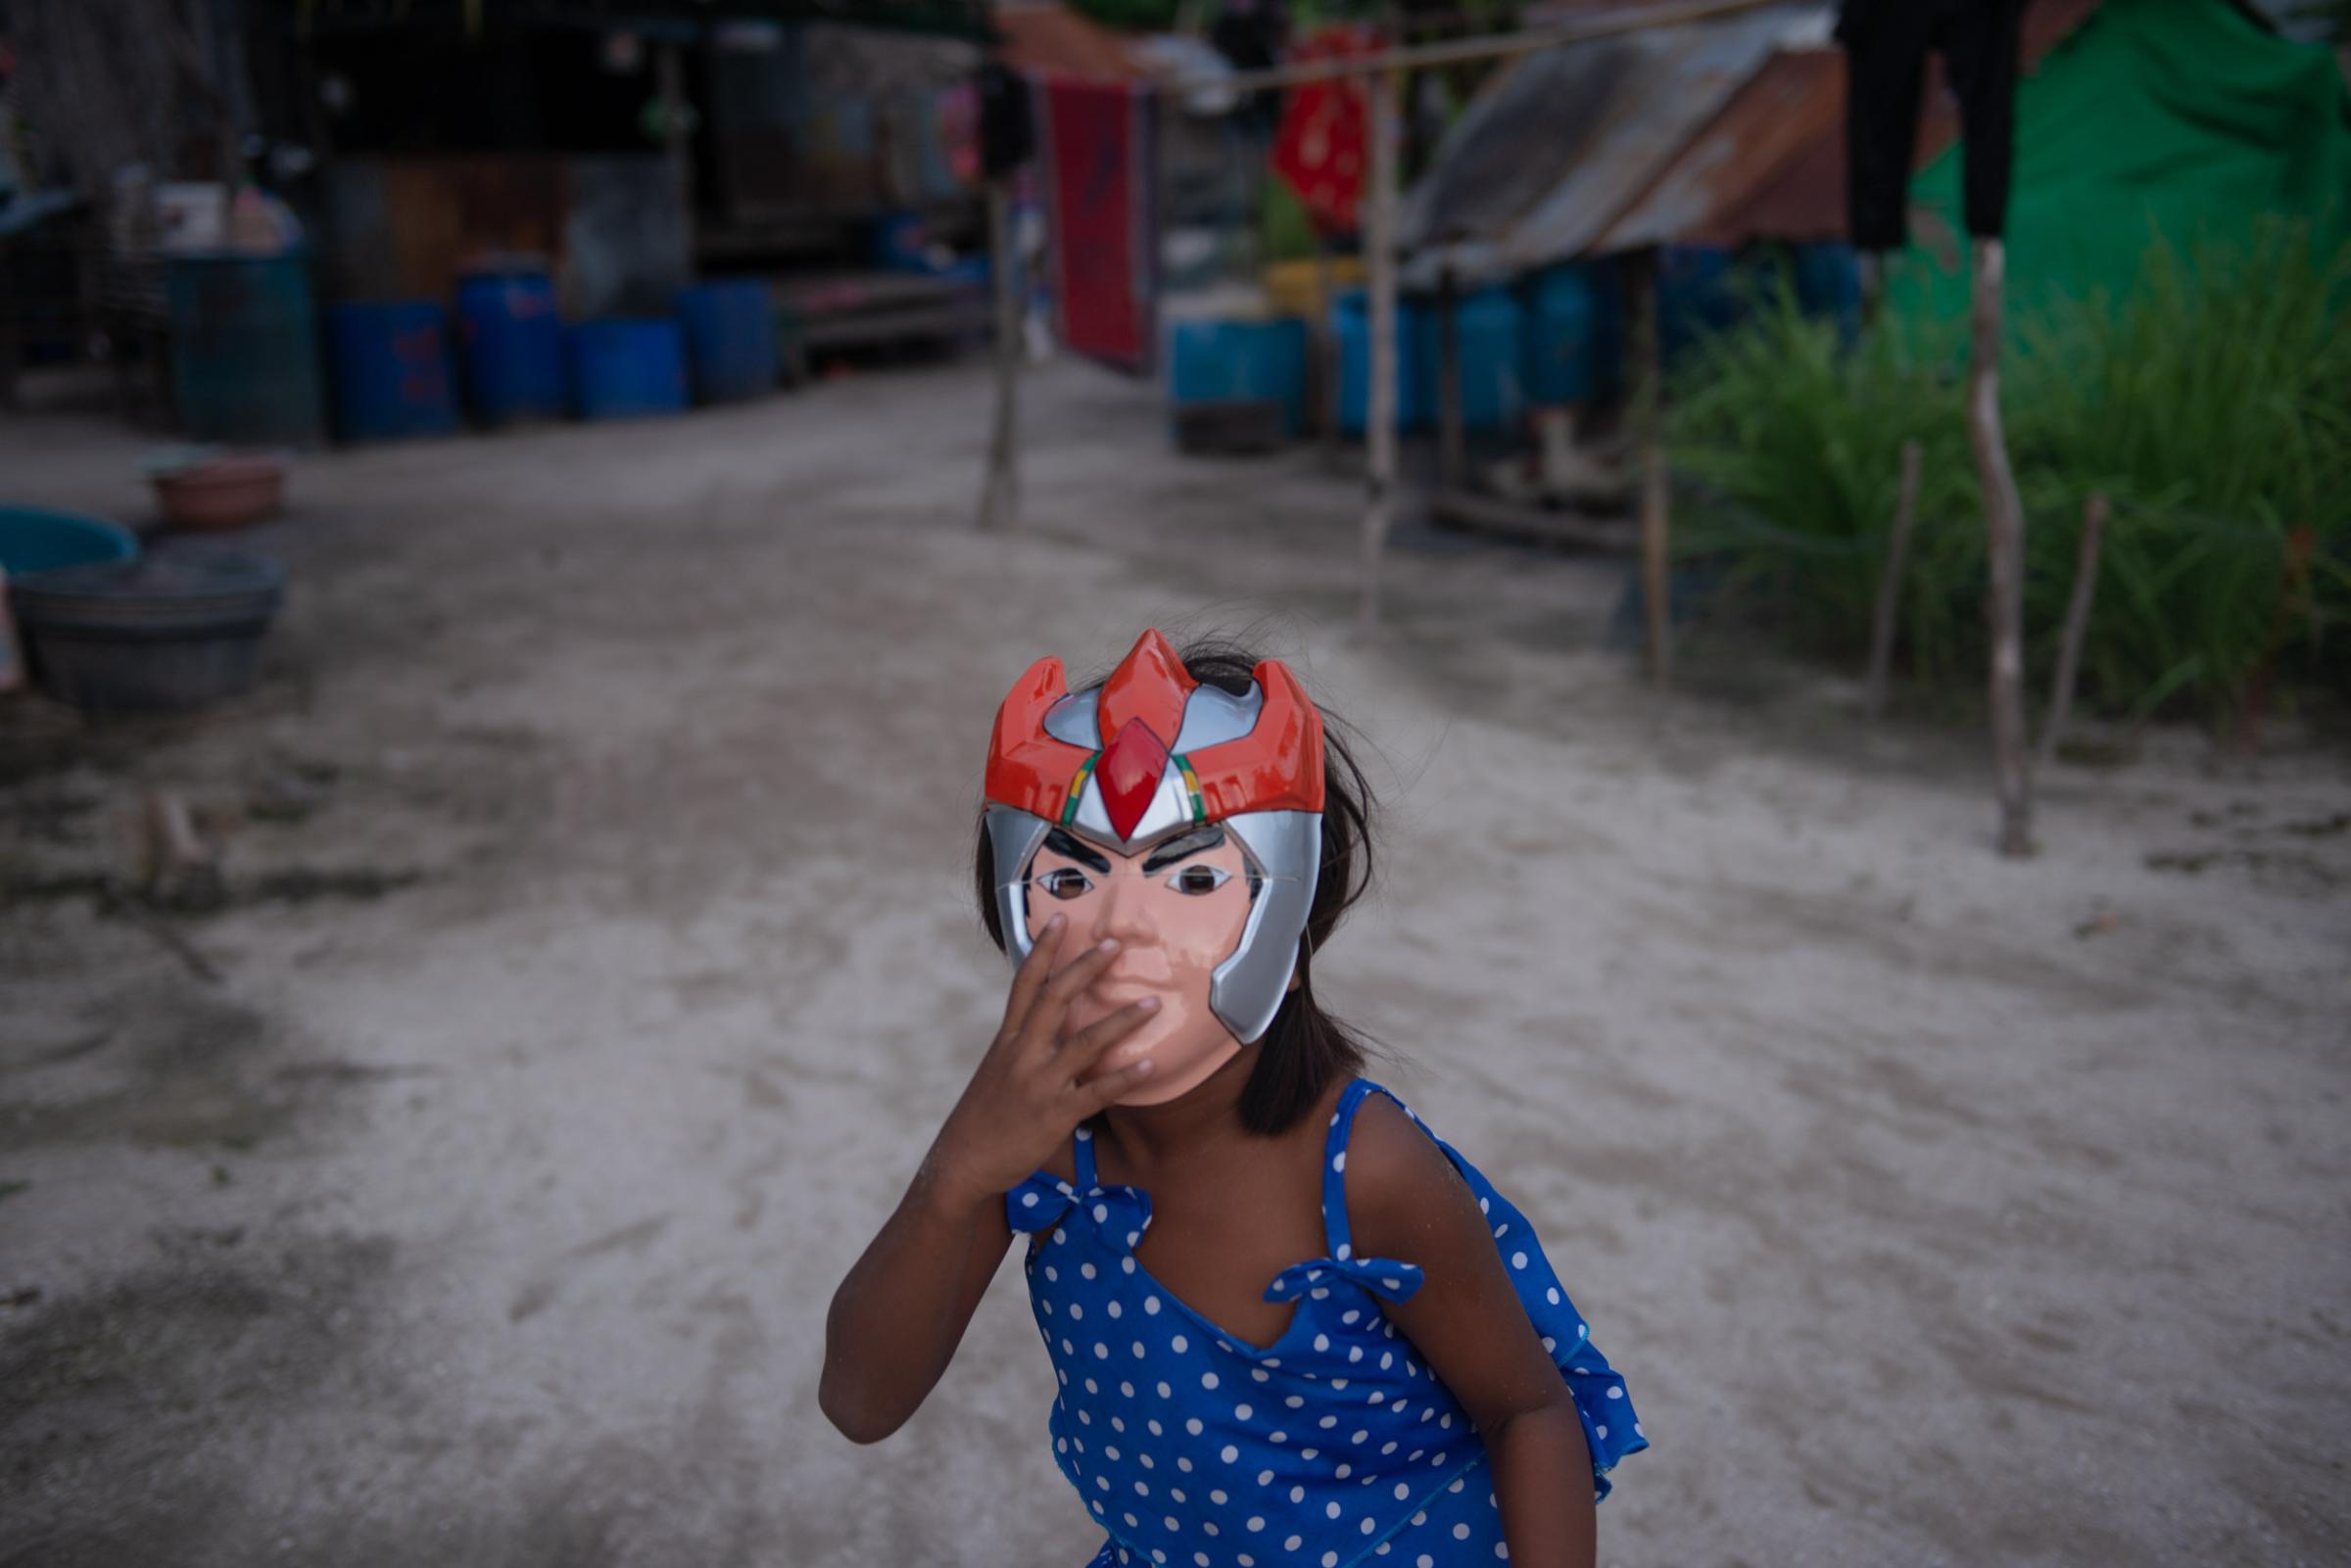 Lipe Island - A child wearing an action figure mask in a small gypsy...